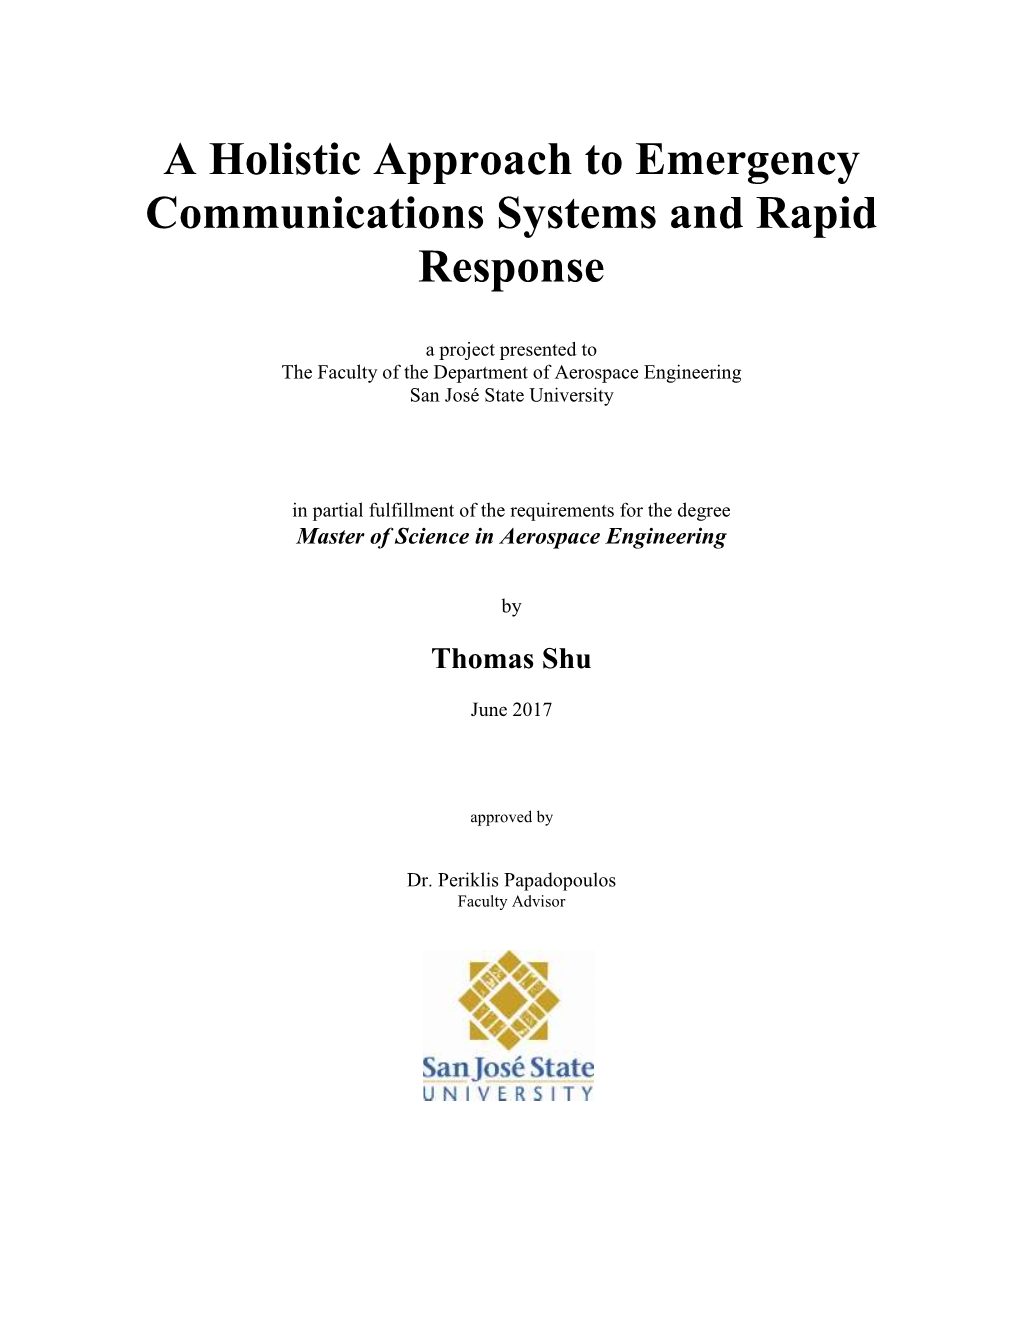 A Holistic Approach to Emergency Communications Systems and Rapid Response